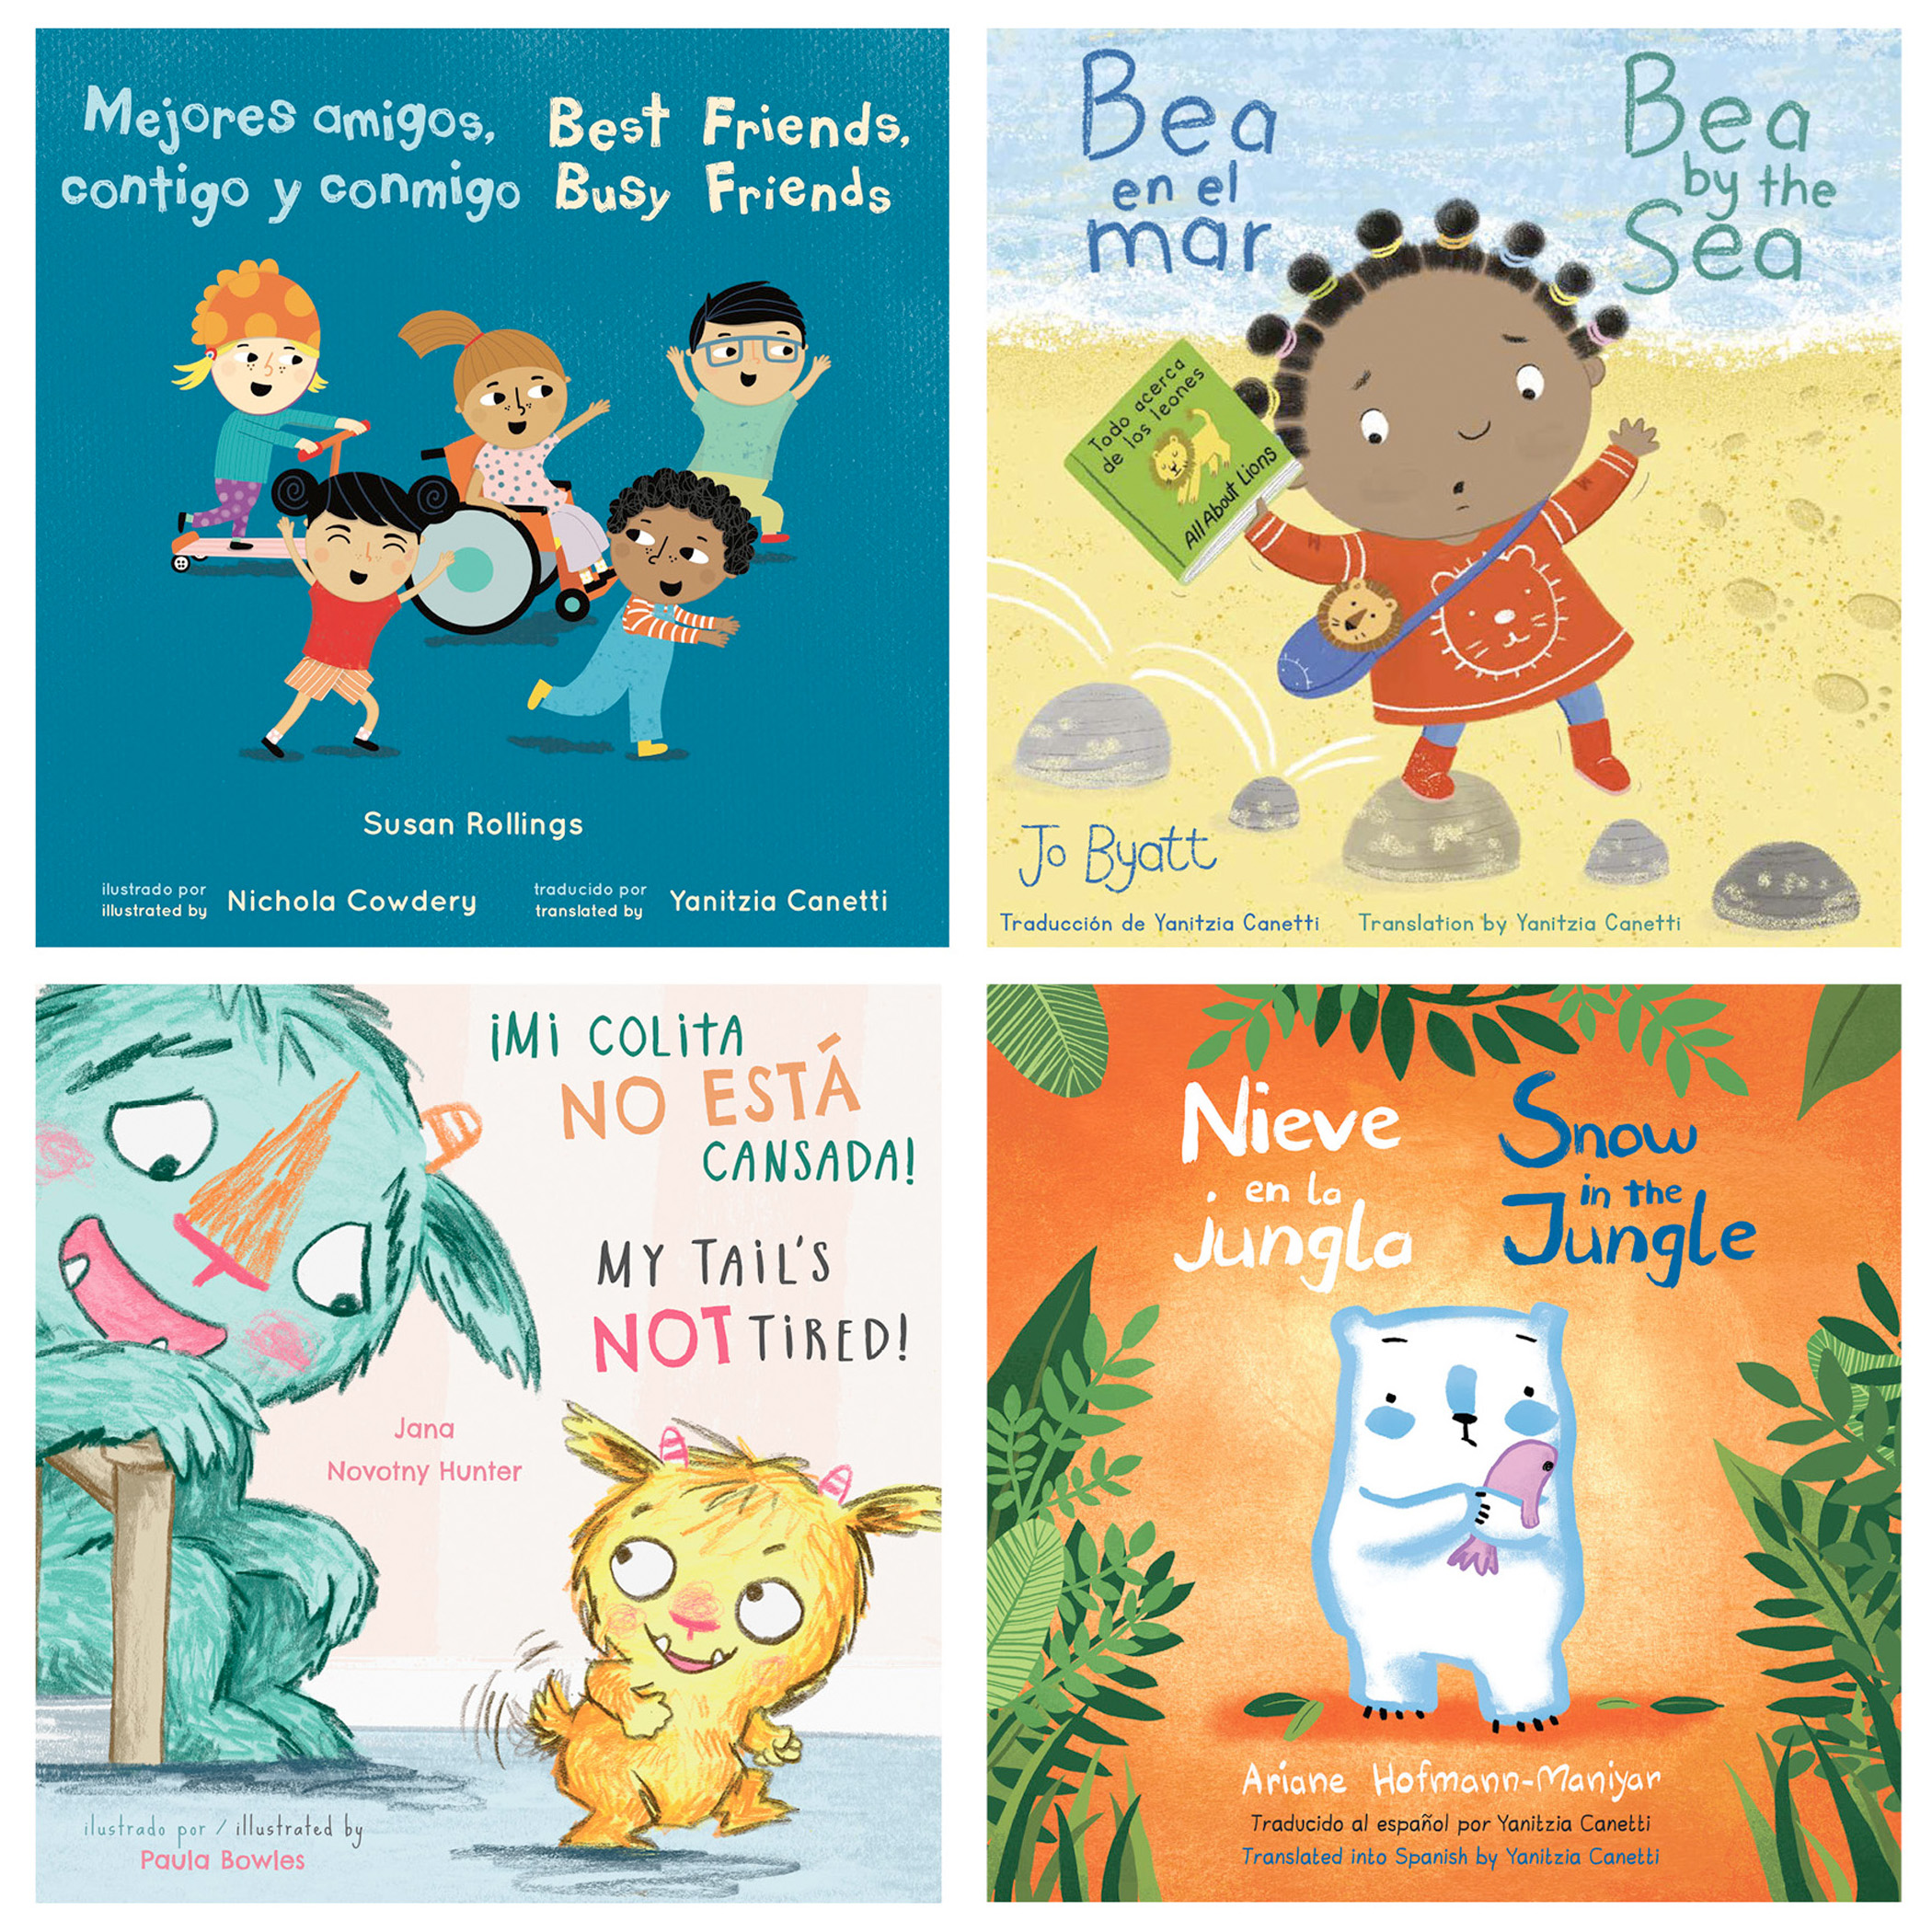 Child's Play Books Library Bilingual Books, Set of 4